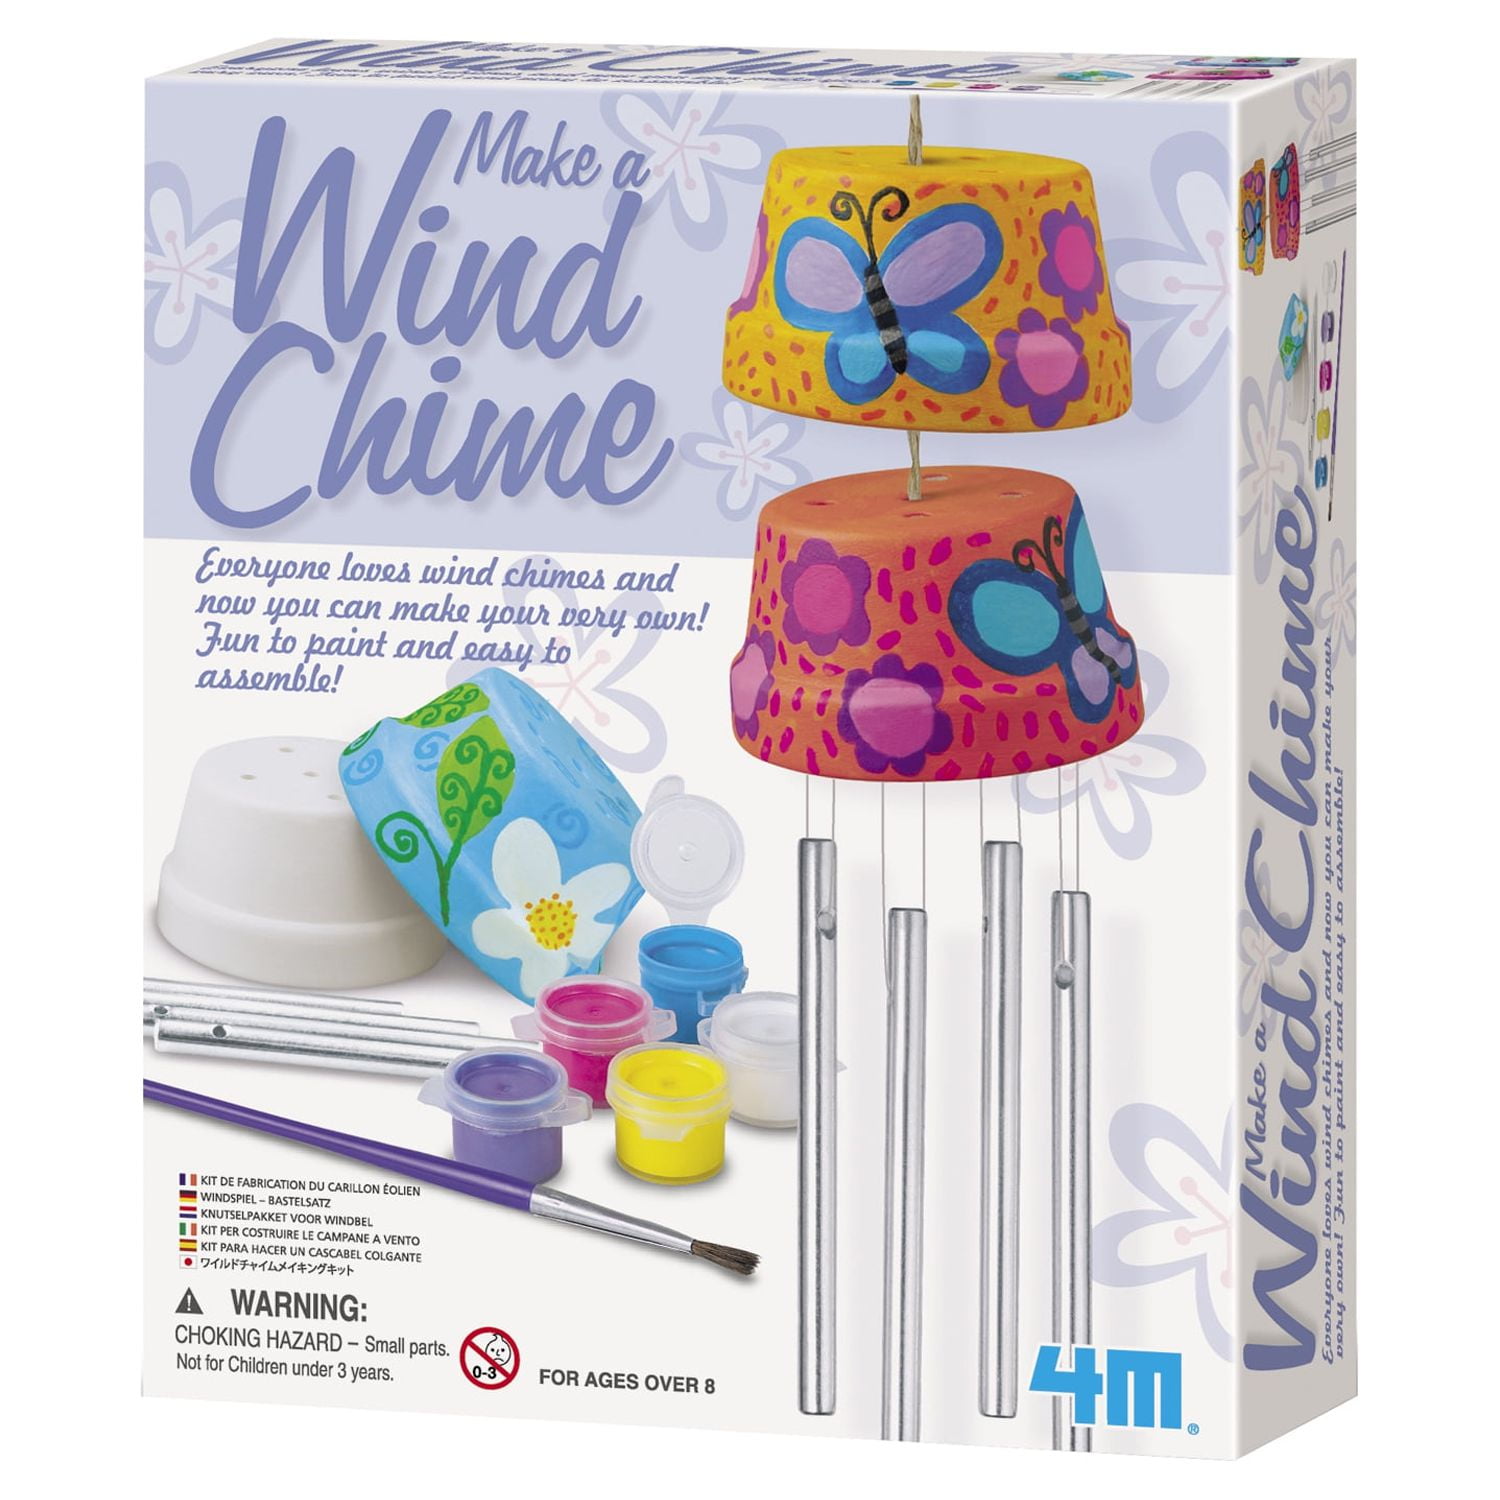 4M Wind Chime Craft Kit for ages 8+ (8 Pieces) - Walmart.com